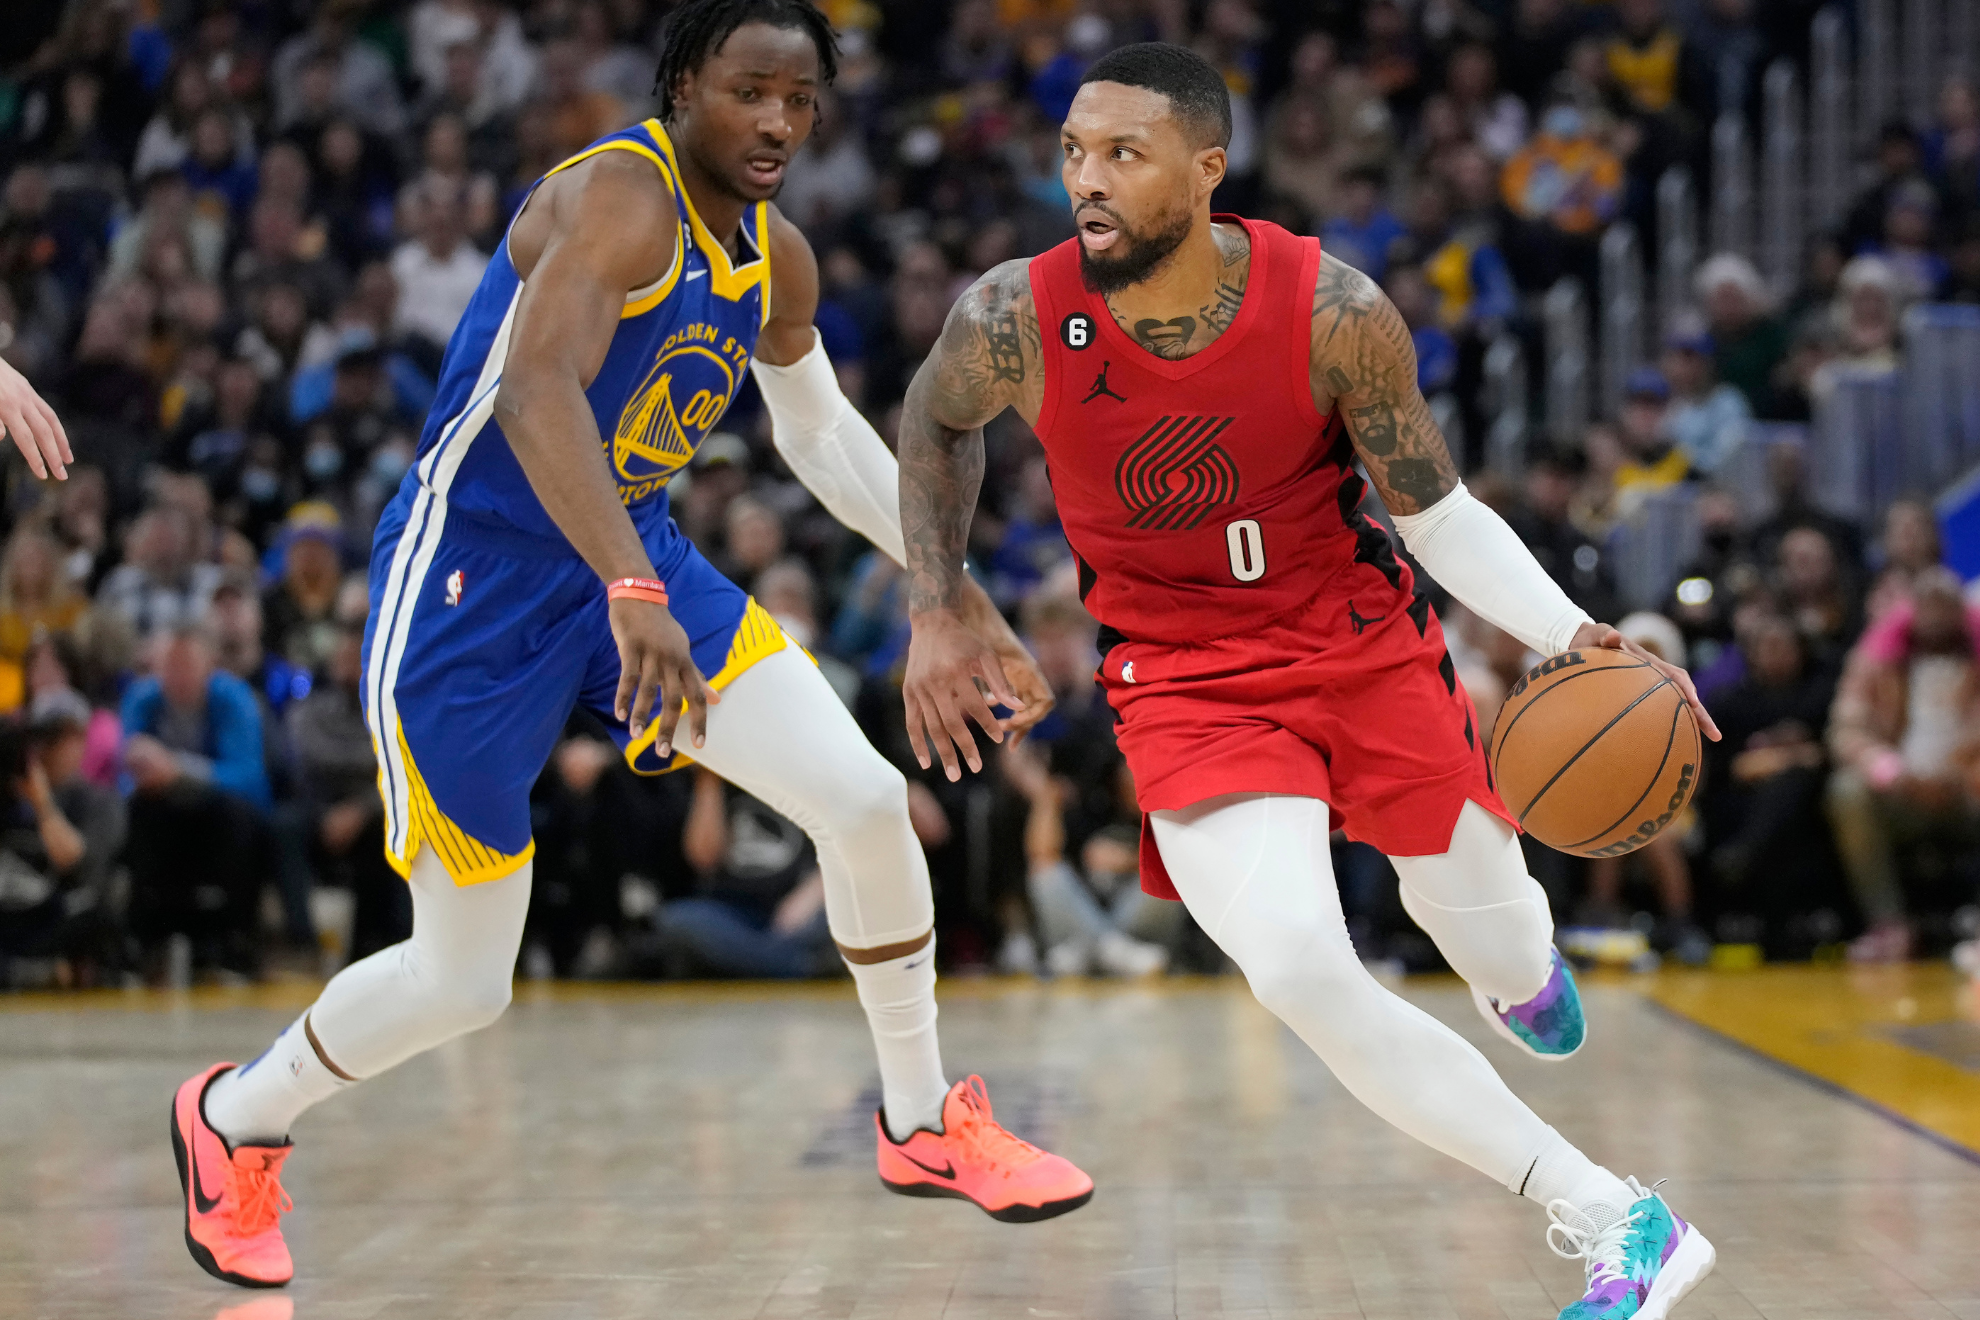 Lillard has said he would never join the Warriors.